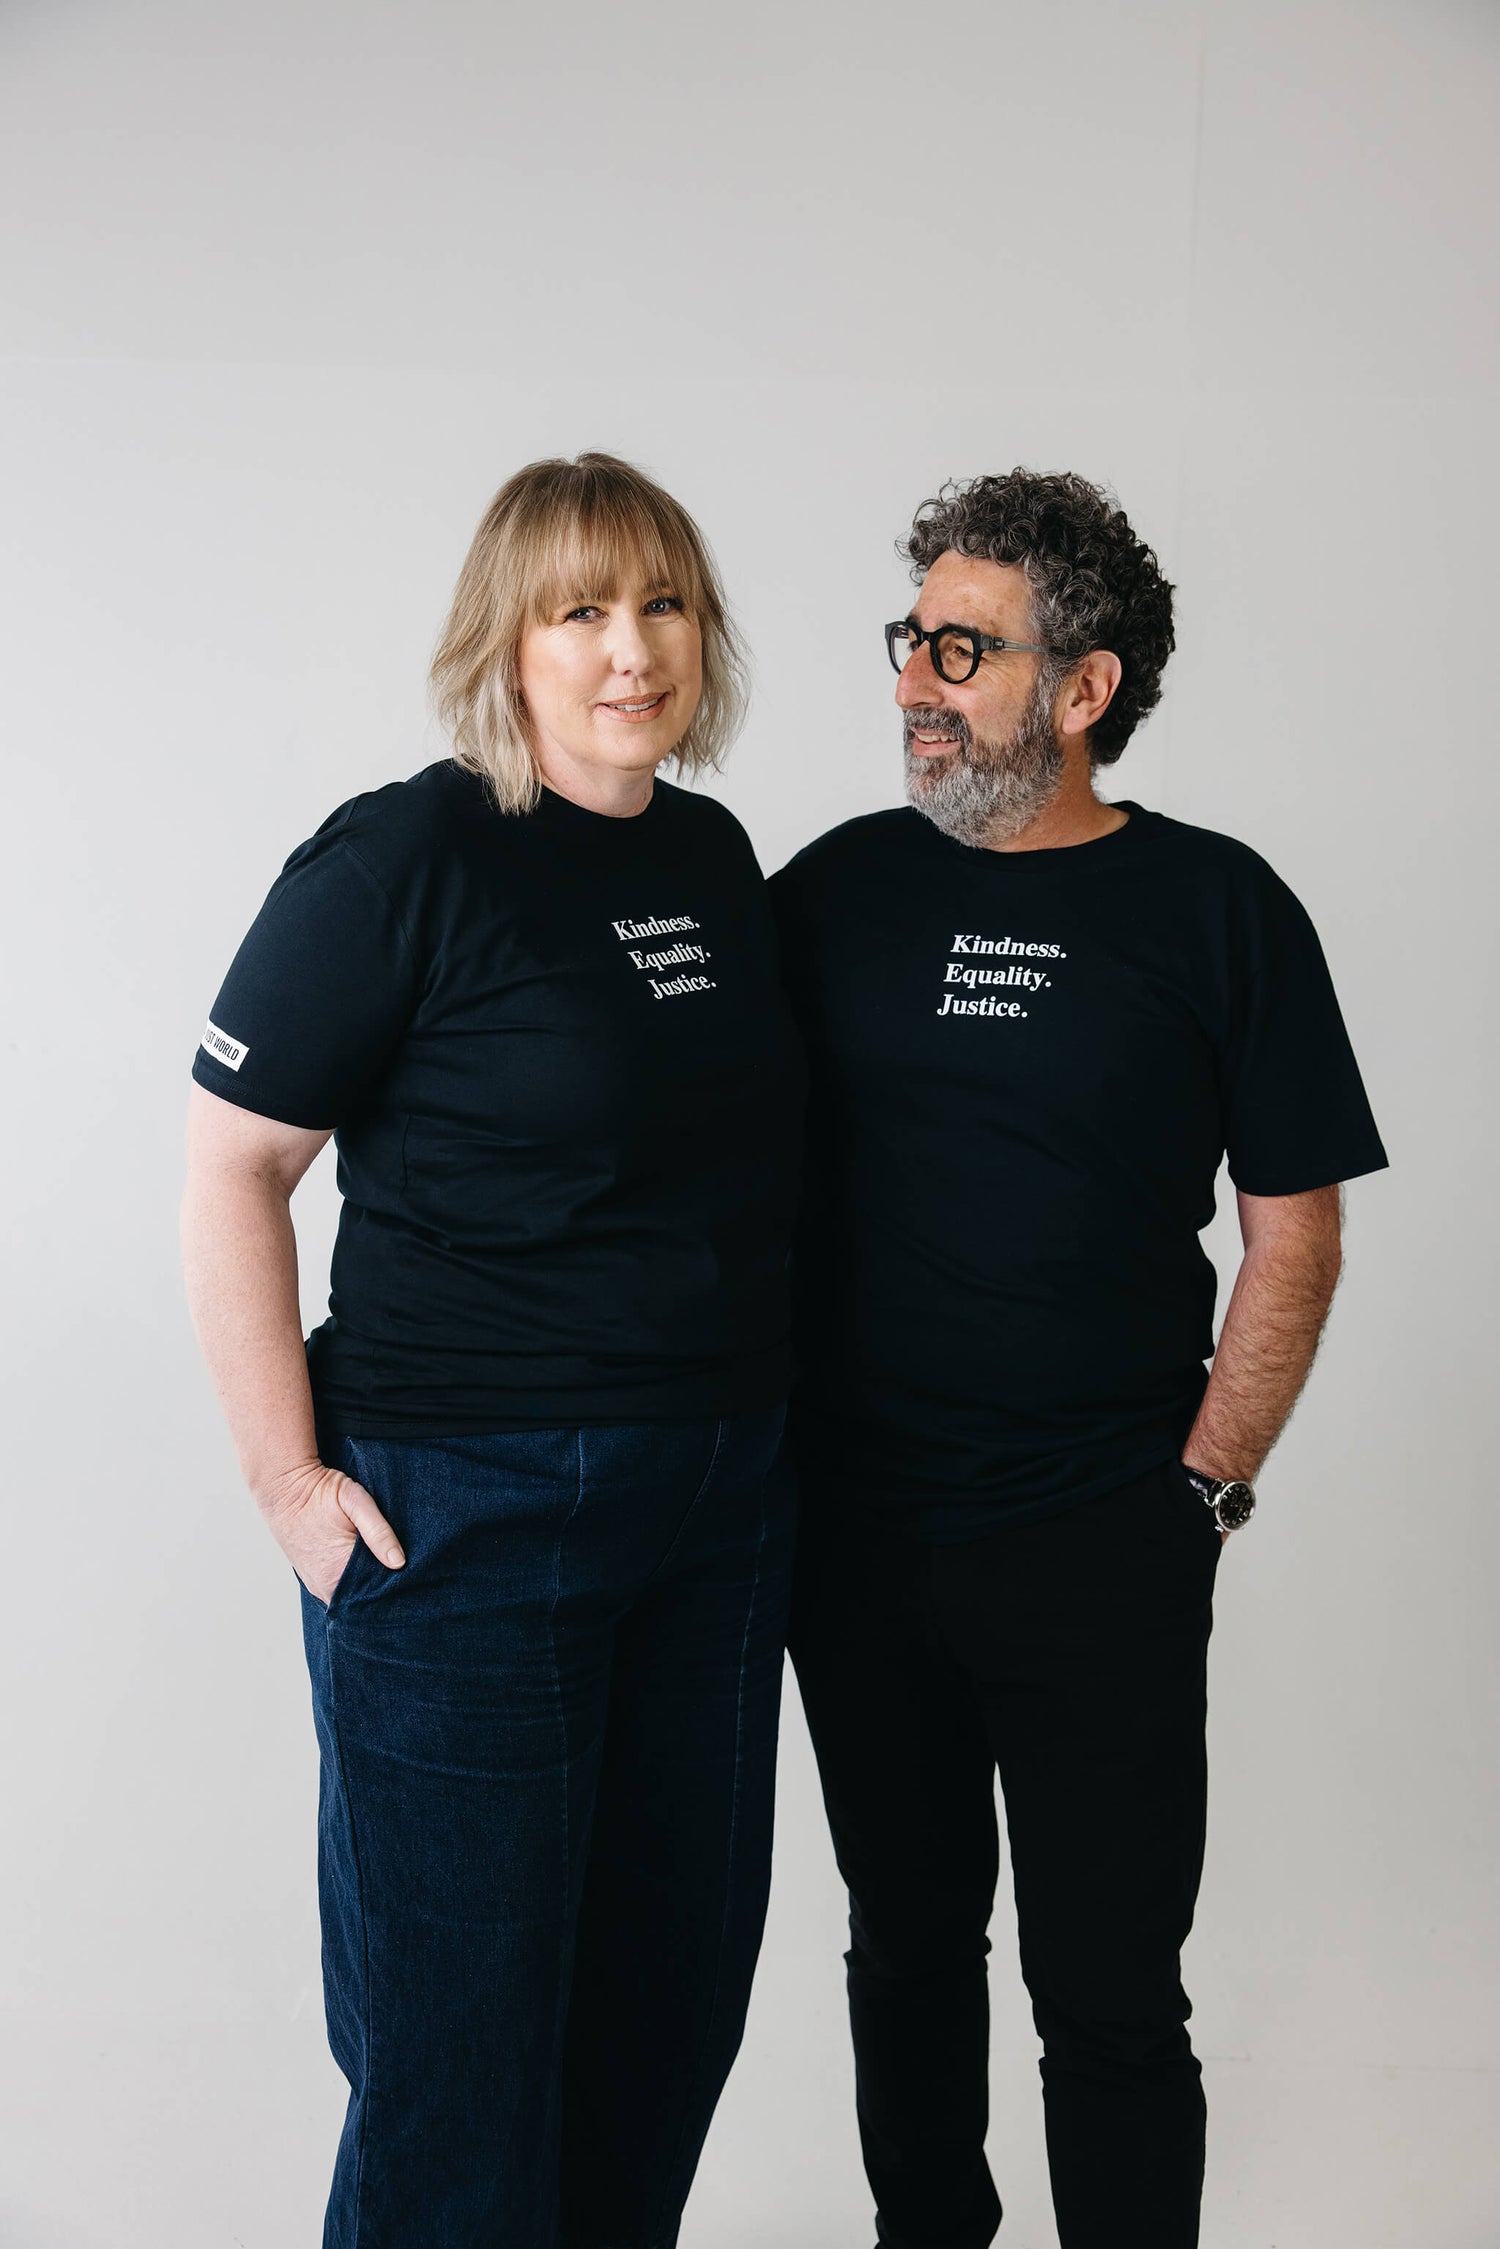 Mel and Joe smiling, both wearing wearing ink blue tshirts with the words 'Kindness Equality Justice.' written in white.